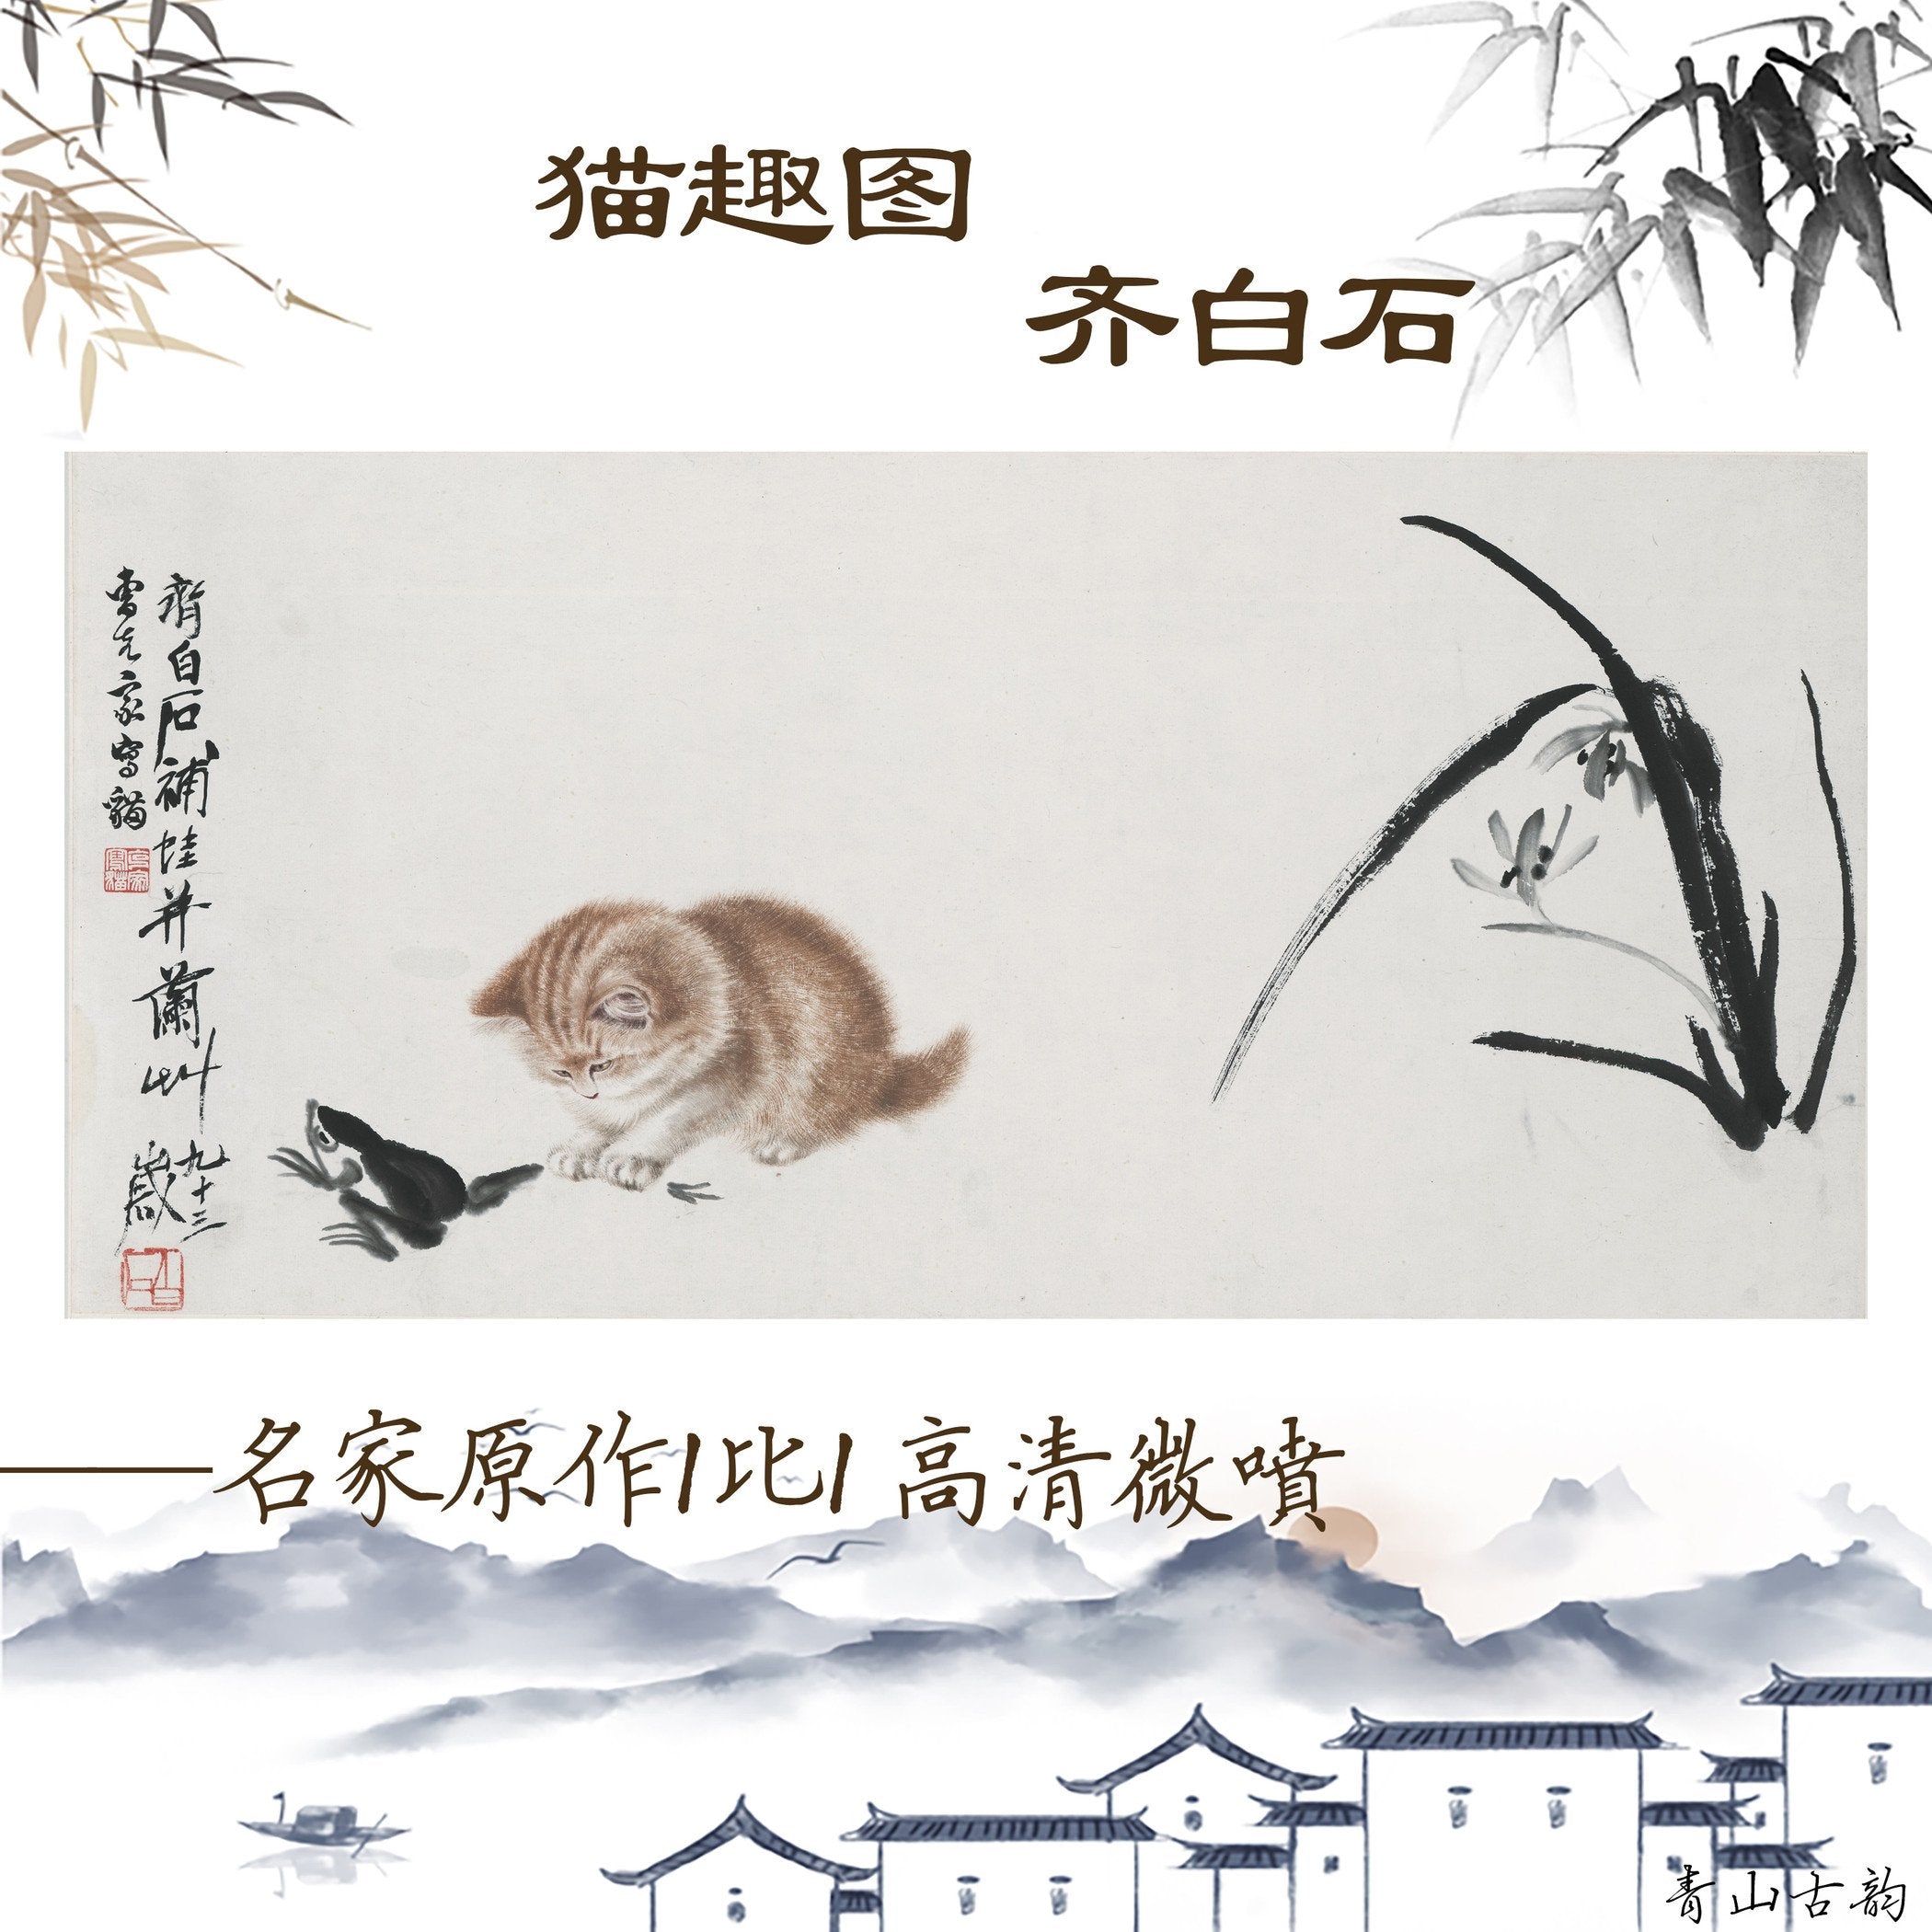 Chinese Antique Art Painting 齐白石 猫趣图 Qi Baishi Cute Cat China Ancient Wall Picture Ideas 3067-Chinese Style Finds™